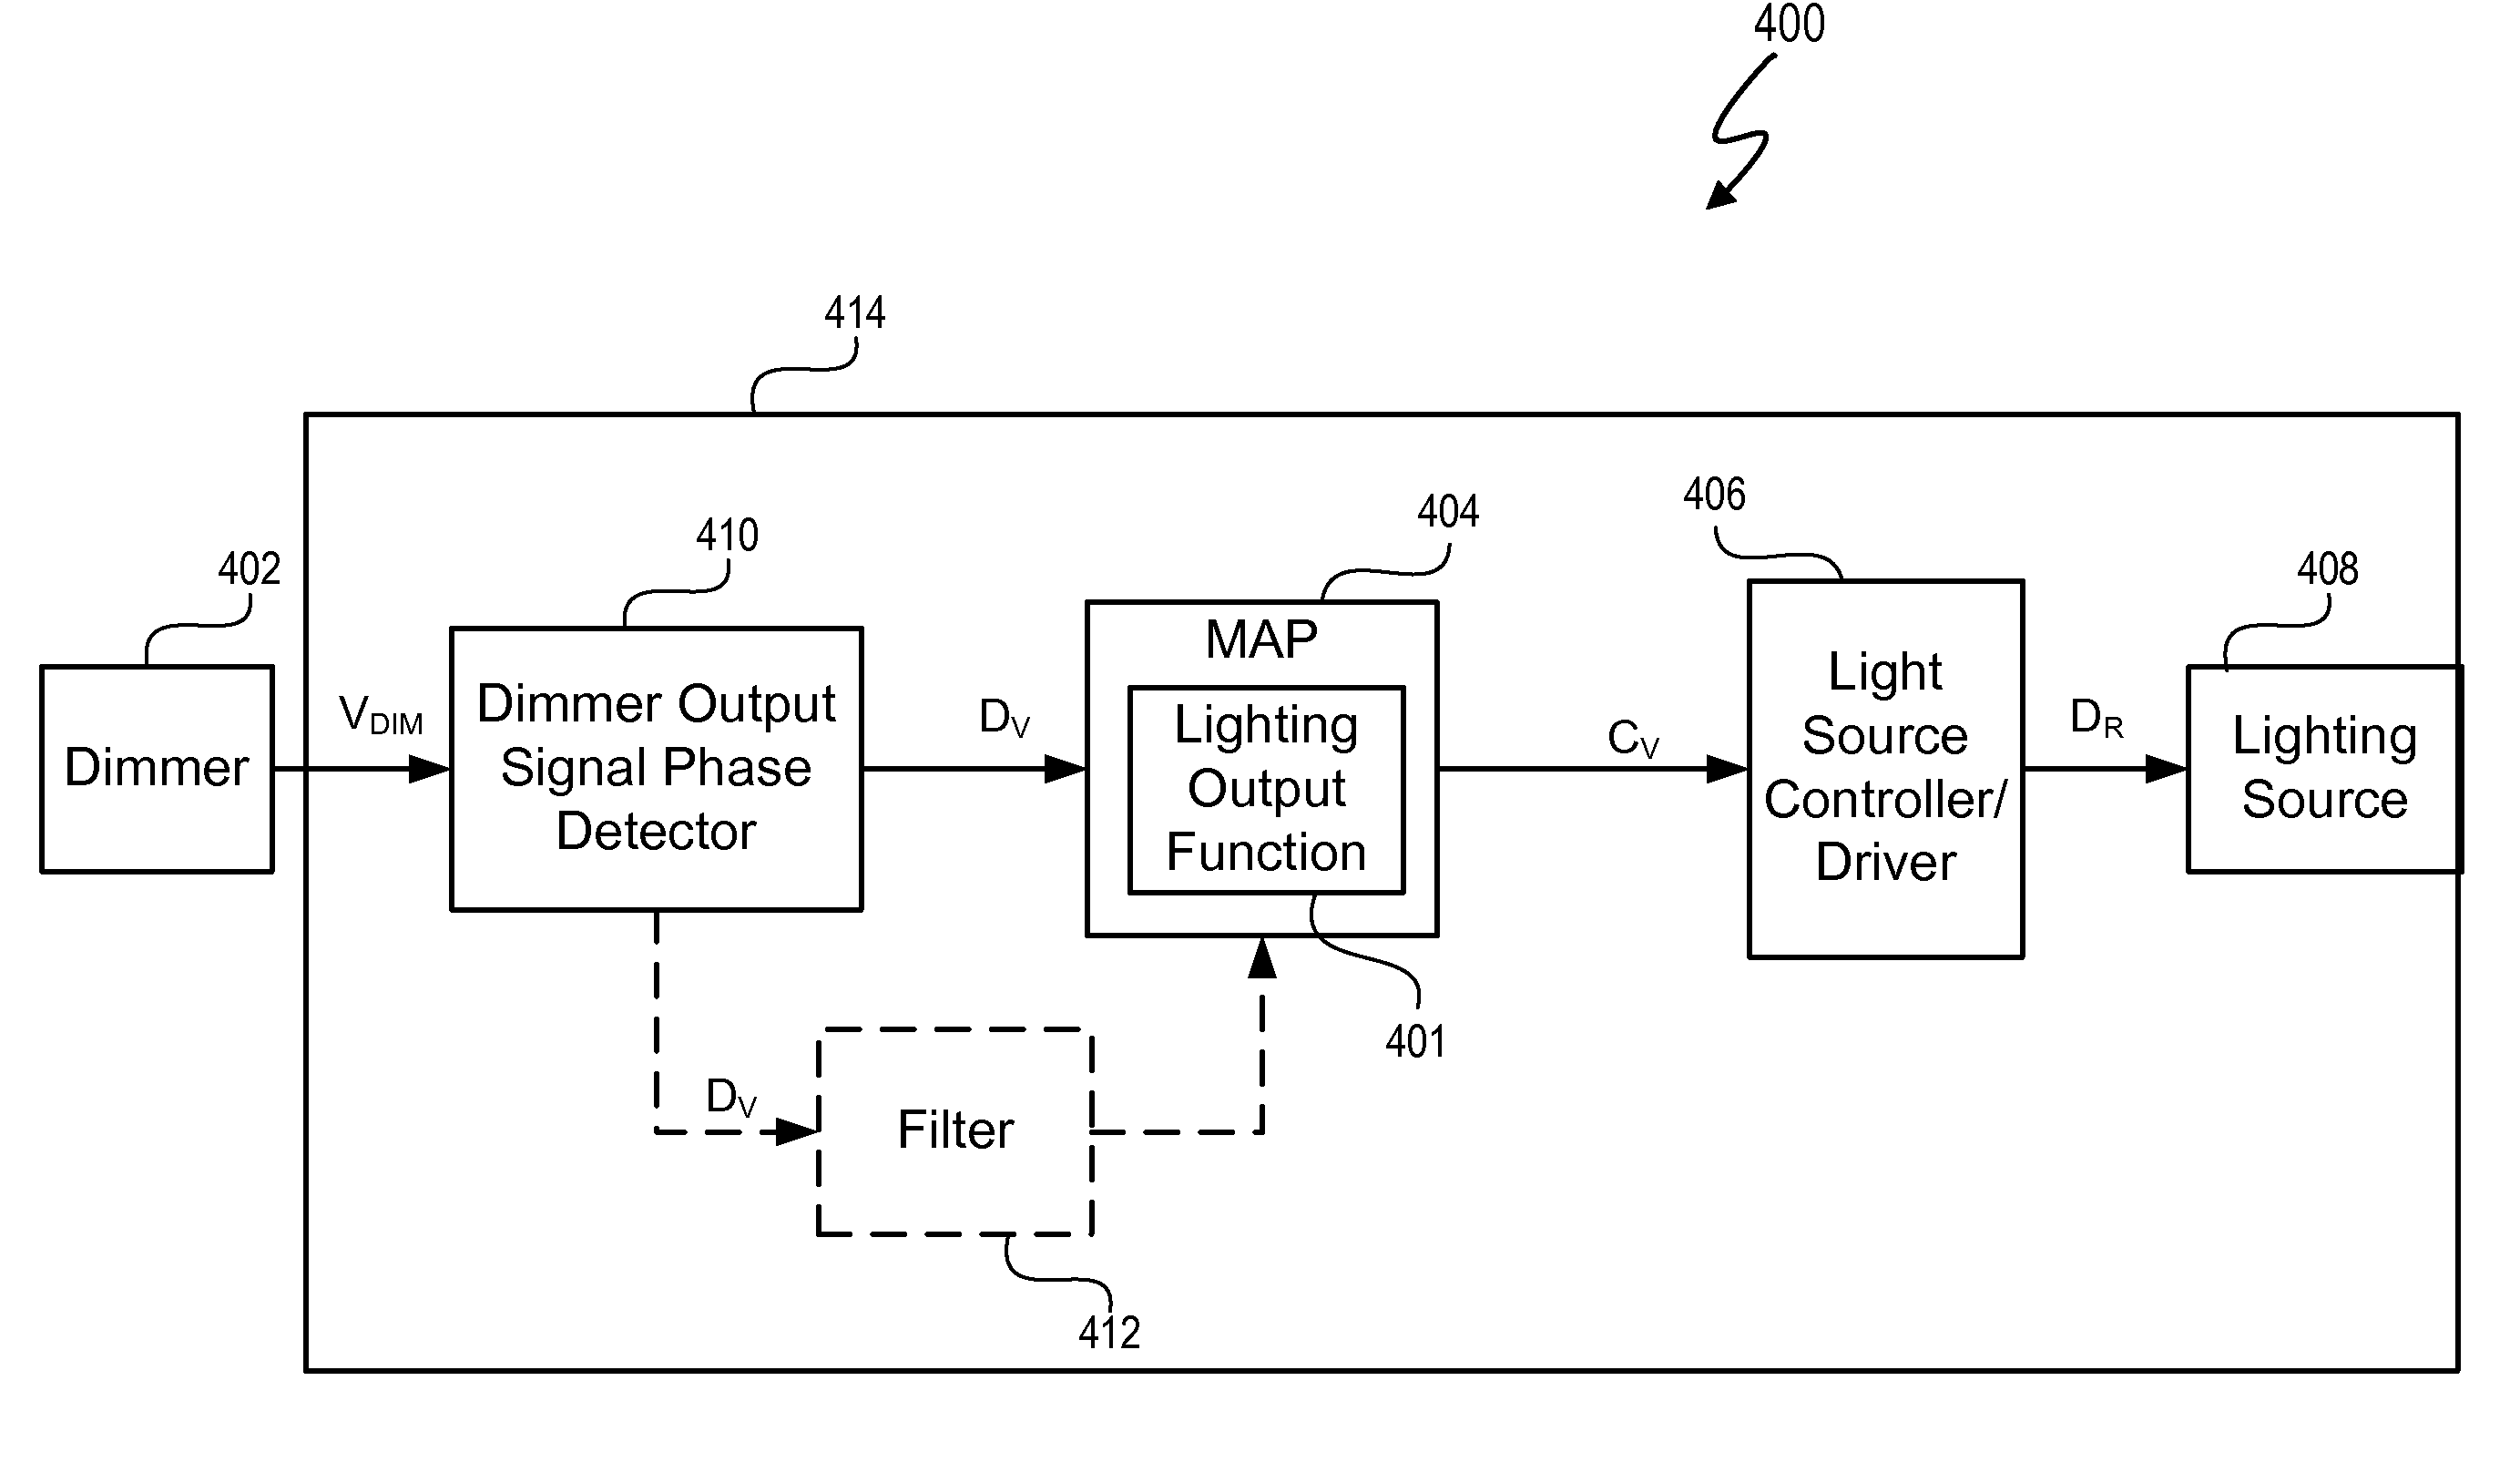 Lighting System with Lighting Dimmer Output Mapping